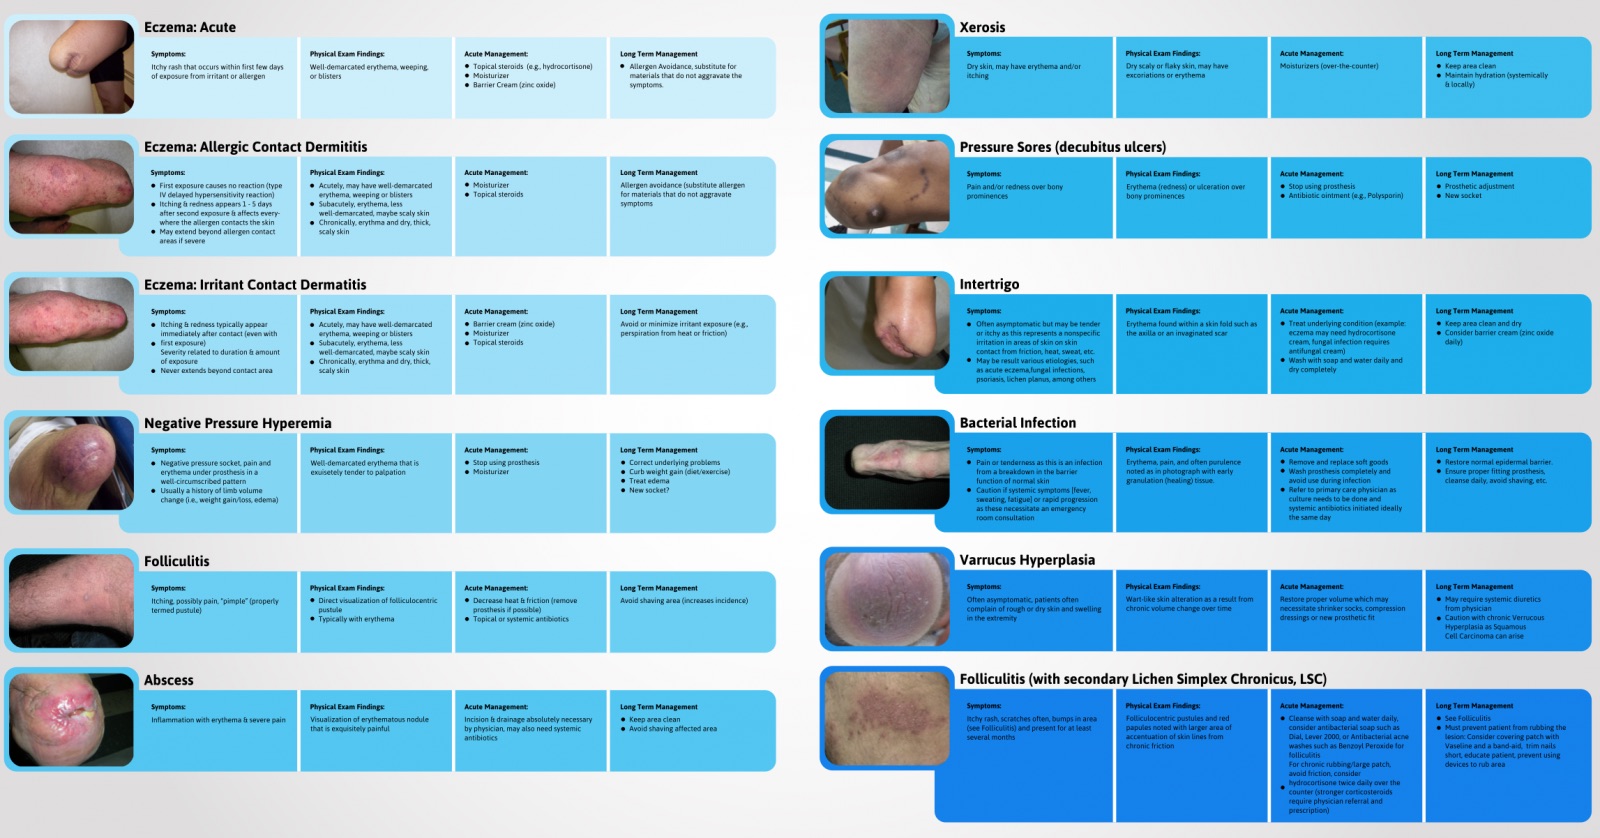 images/Dermatology%20Conditions%20for%20Amputees%20Poster%20.jpg